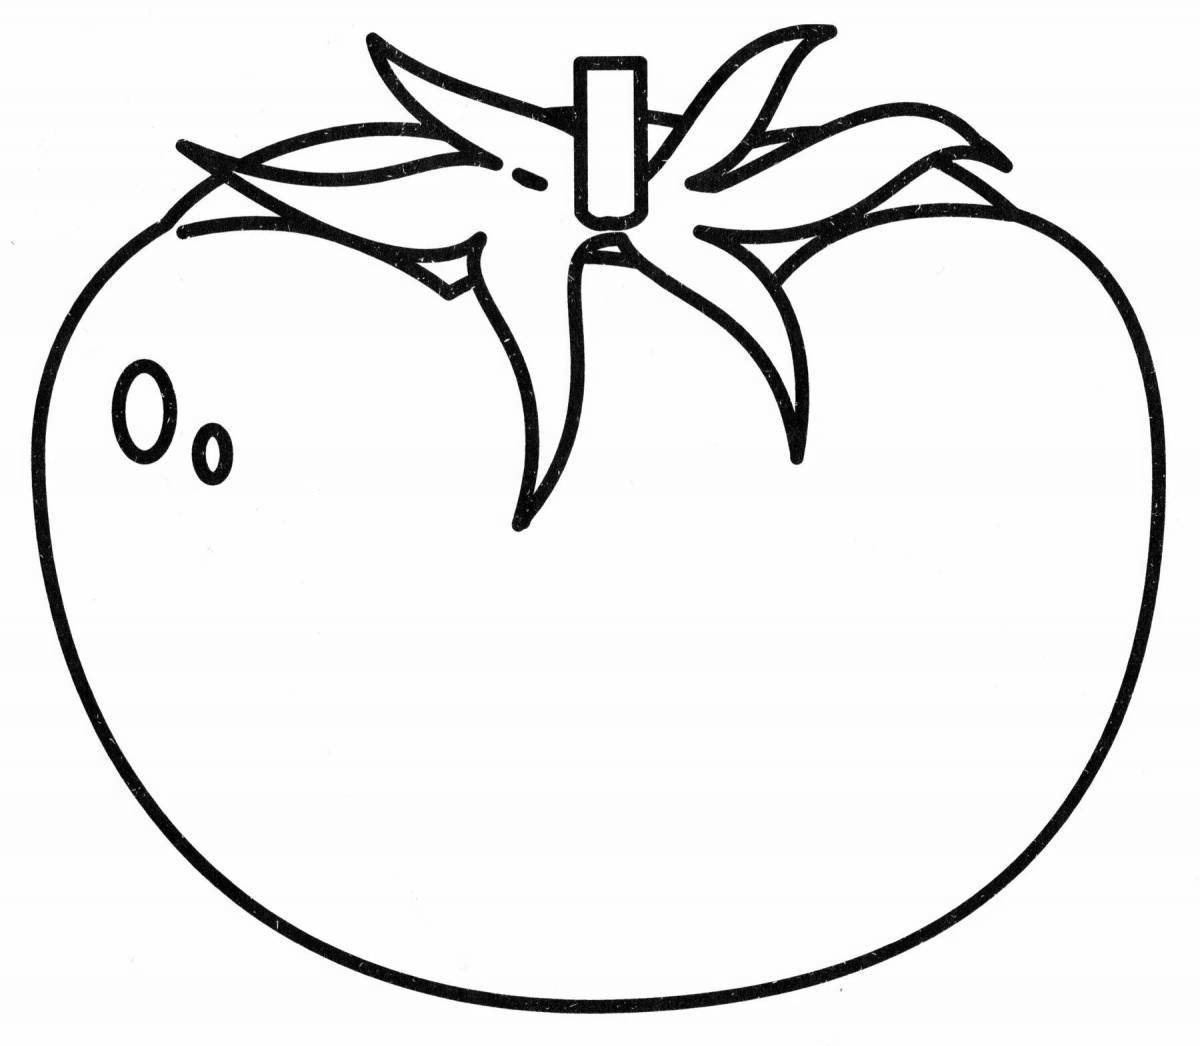 Color-frenzy tomato coloring page для детей 2-3 лет